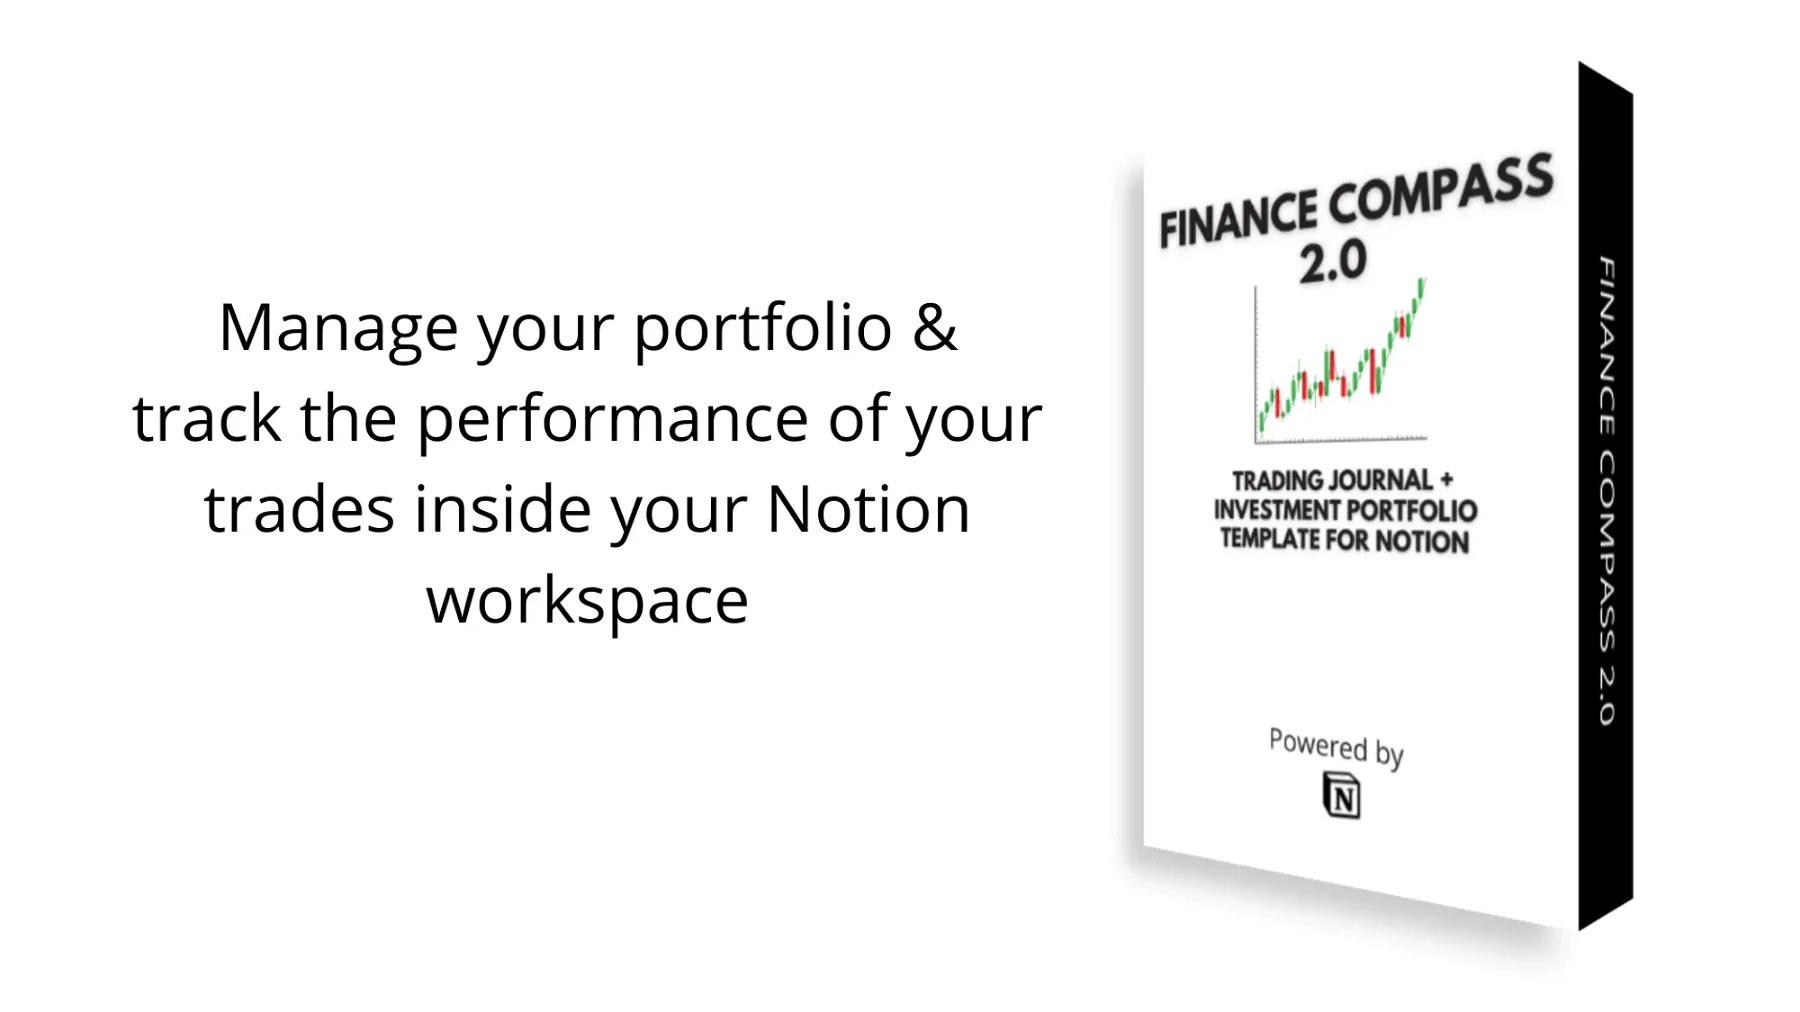 Finance Compass 2.0 - Trading Journal + Investment Portfolio Template for Notion